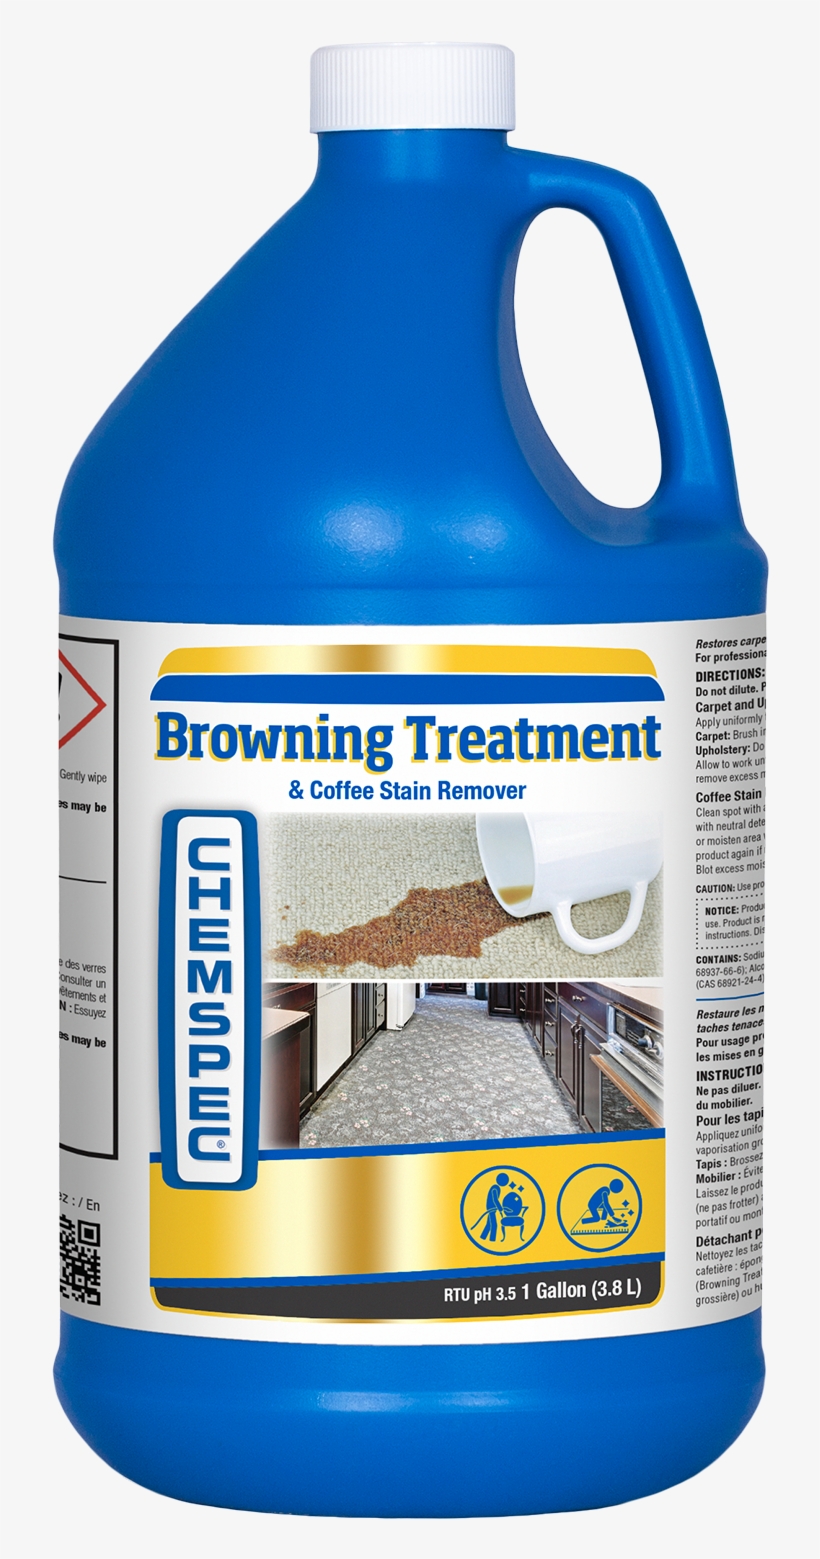 Browning Treatment And Coffee Stain Remover - Chemspec Browning Treatment/coffee Stain, transparent png #907934